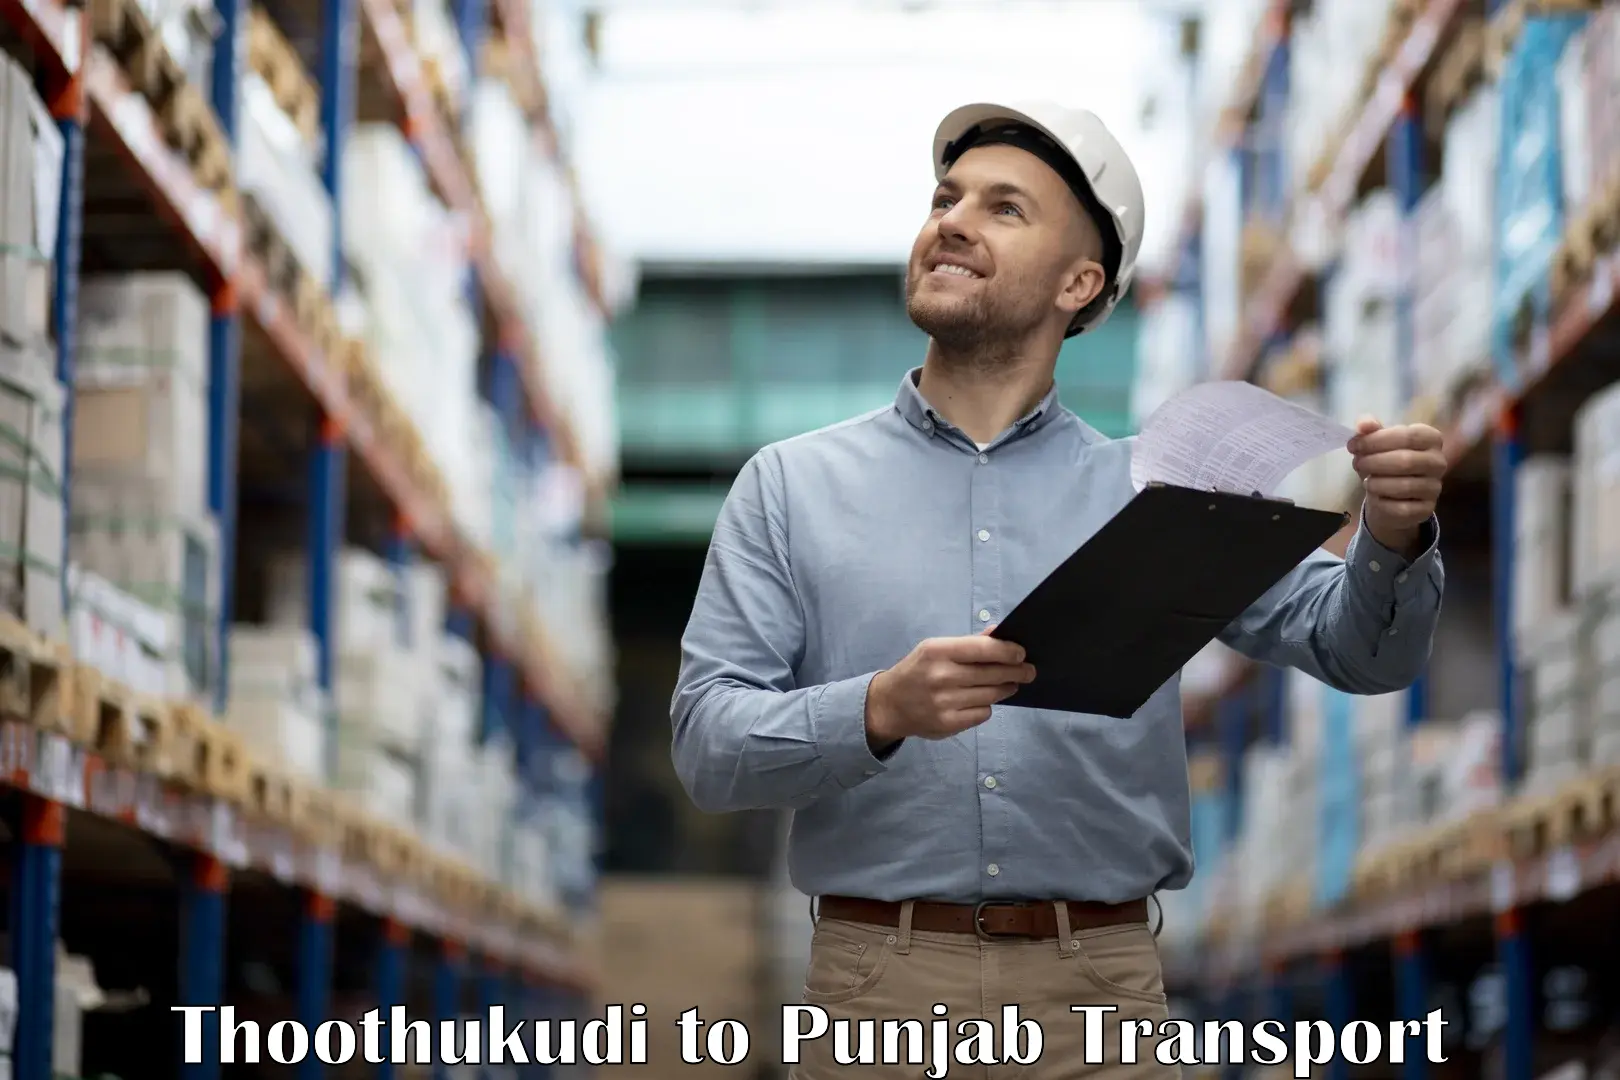 Goods delivery service Thoothukudi to Patiala